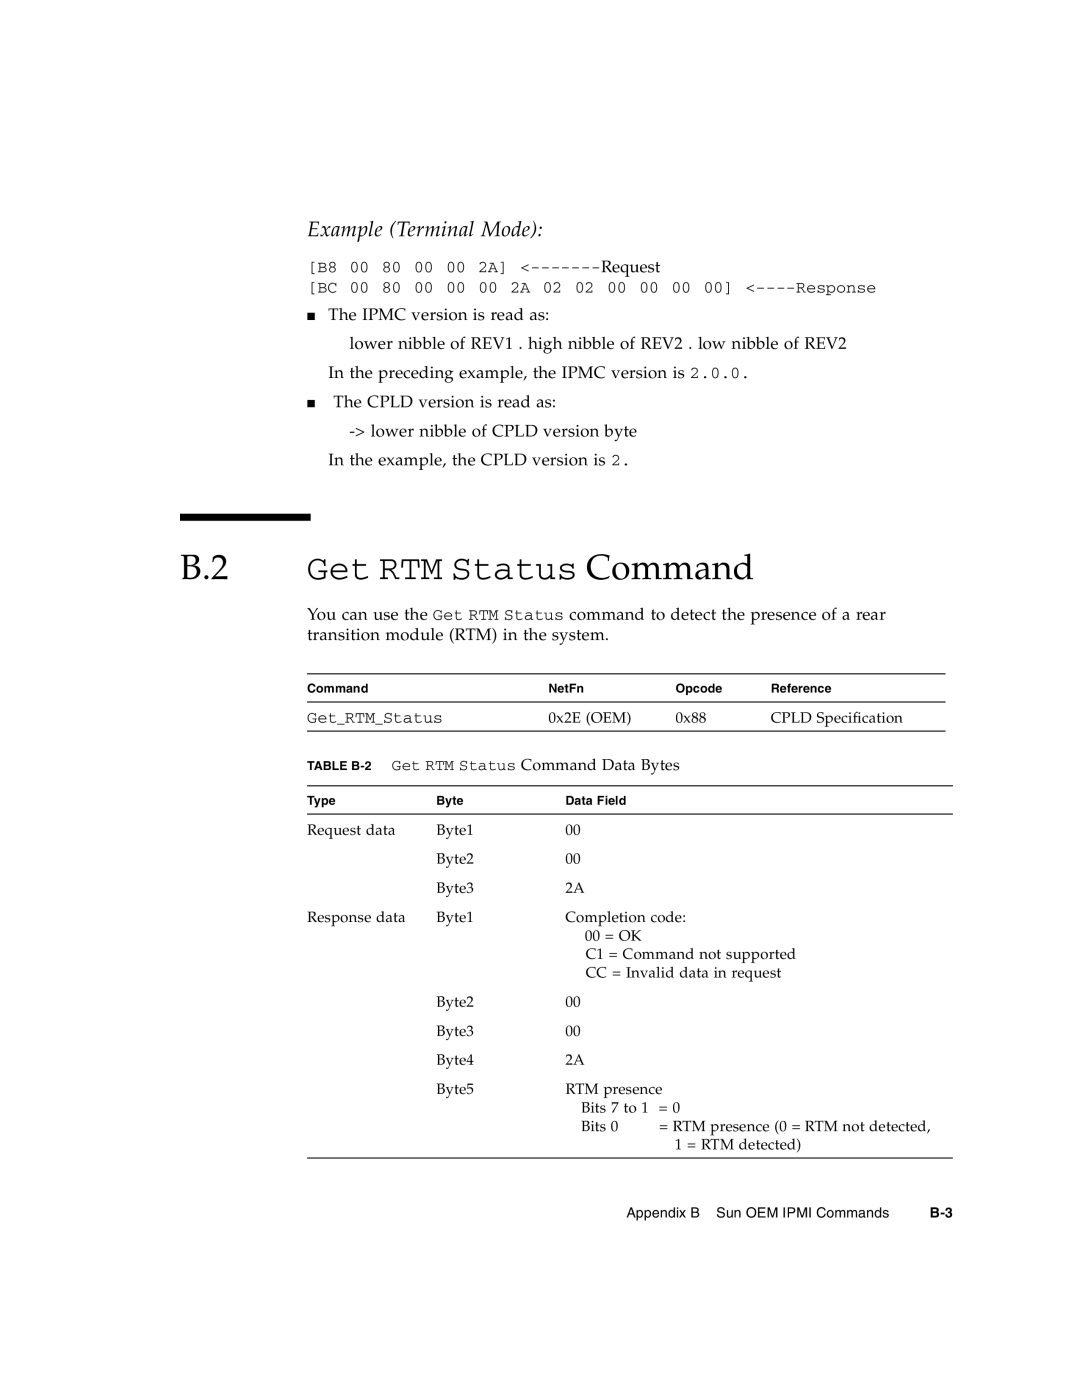 Sun Microsystems CP3260 manual B.2 Get RTM Status Command, Example Terminal Mode 